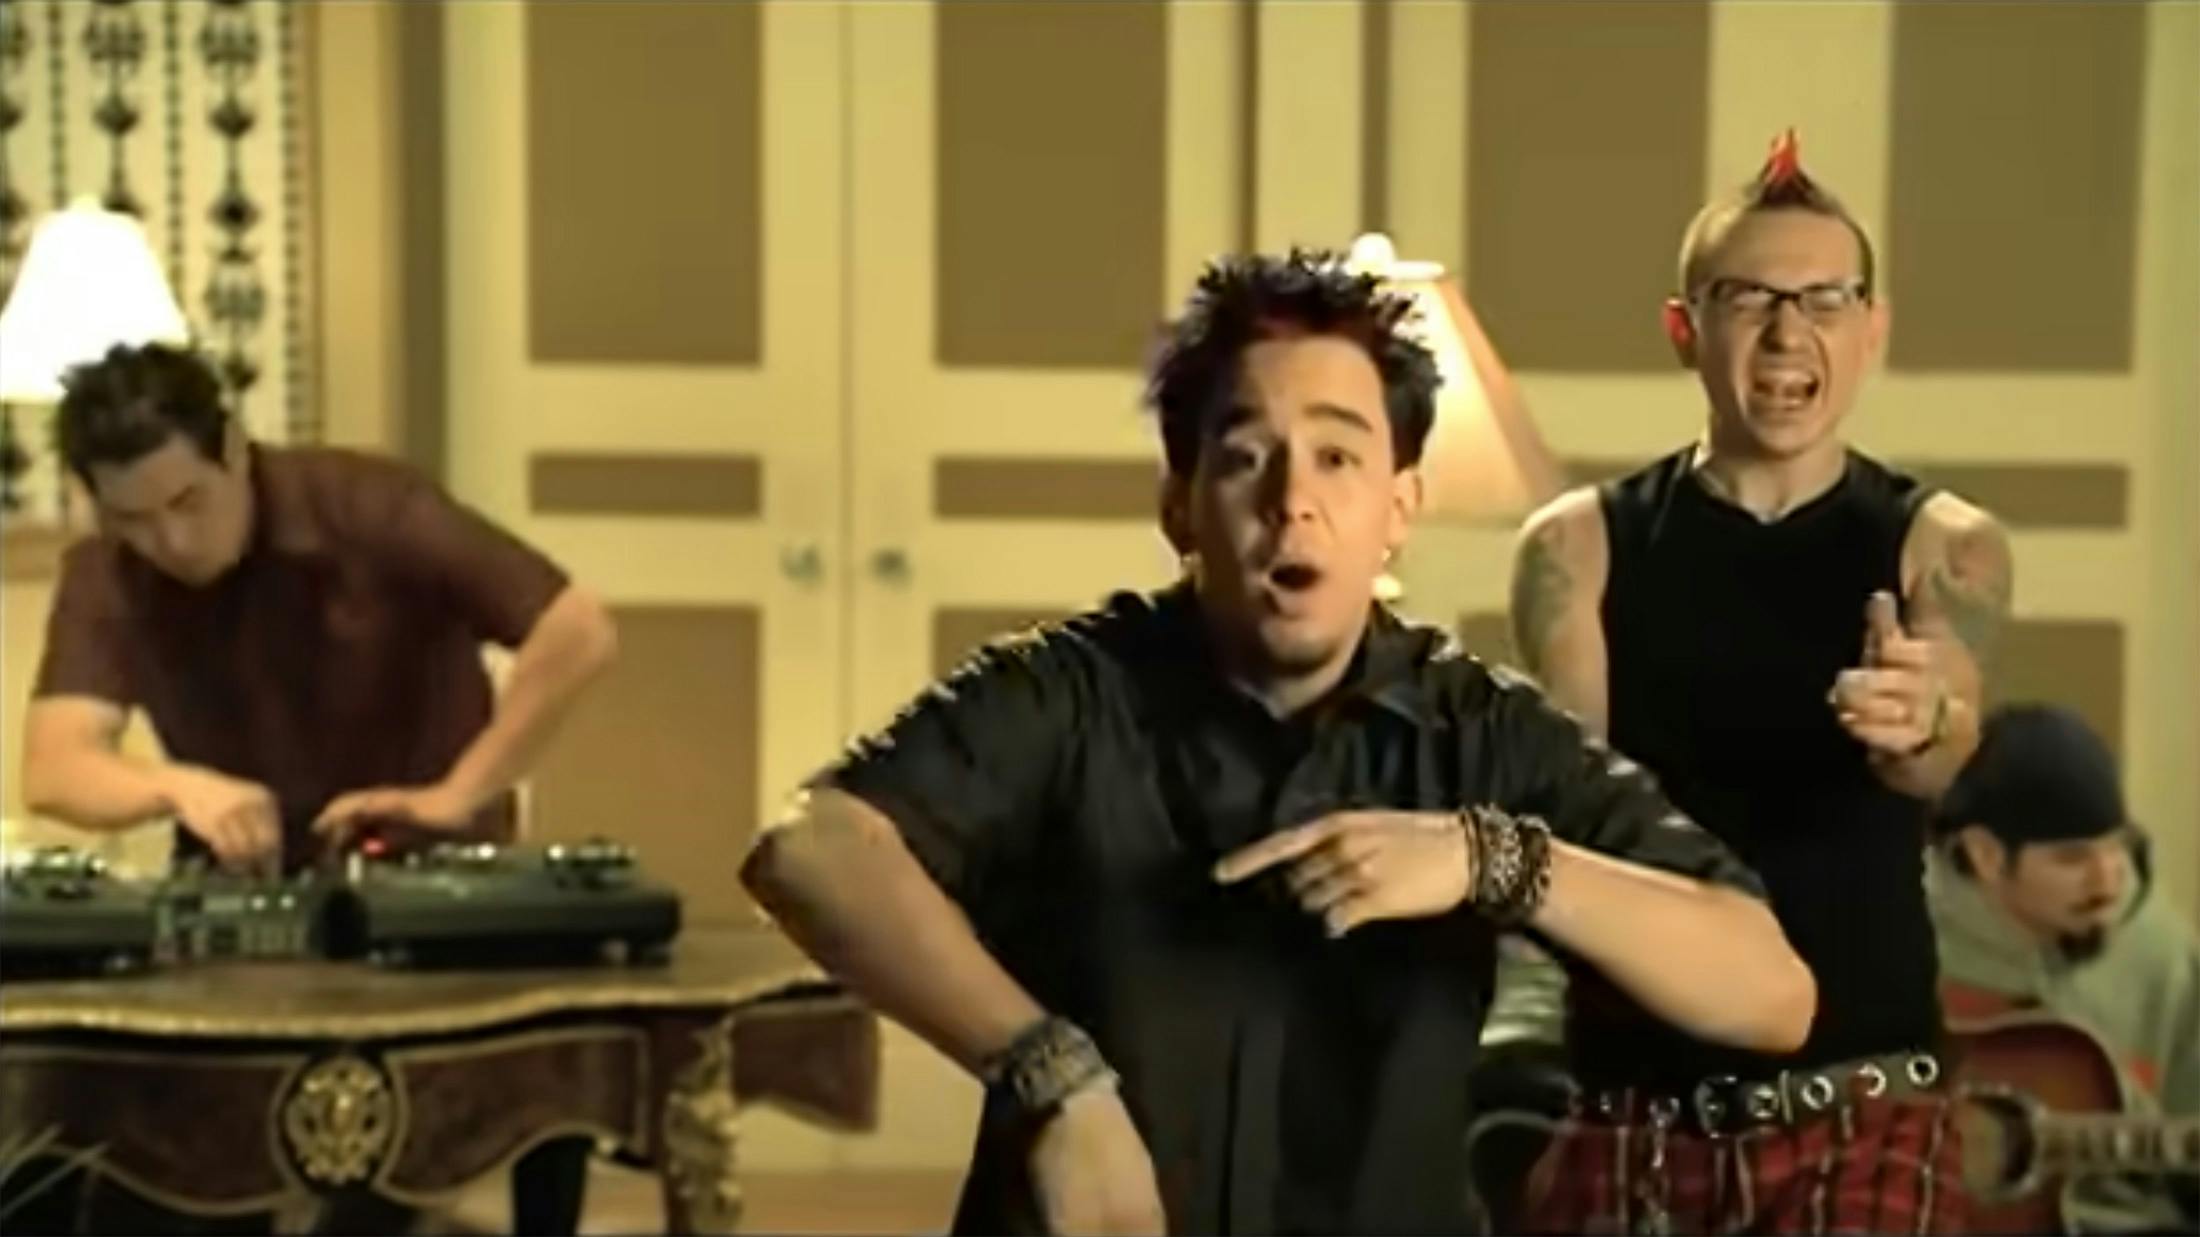 "I’m Sorry, I Don’t Know What We Were Doing": Mike Shinoda Reflects On Linkin Park's Papercut Video